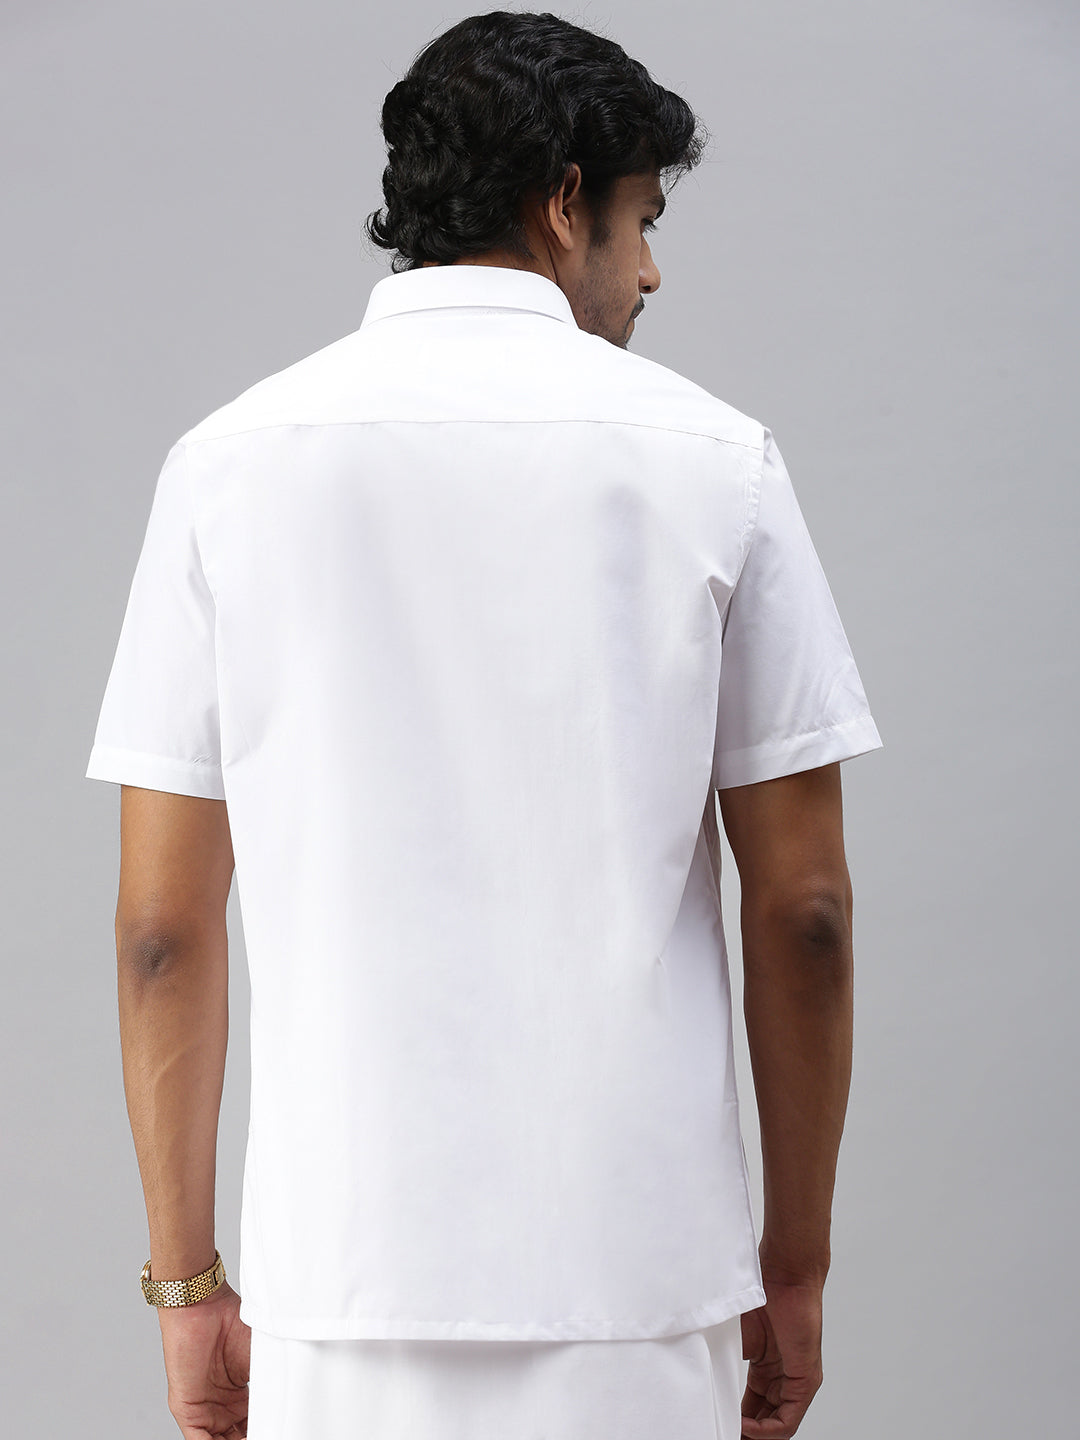 Mens Wrinkle Free White Shirt Half Sleeves Soft Touch-Back view